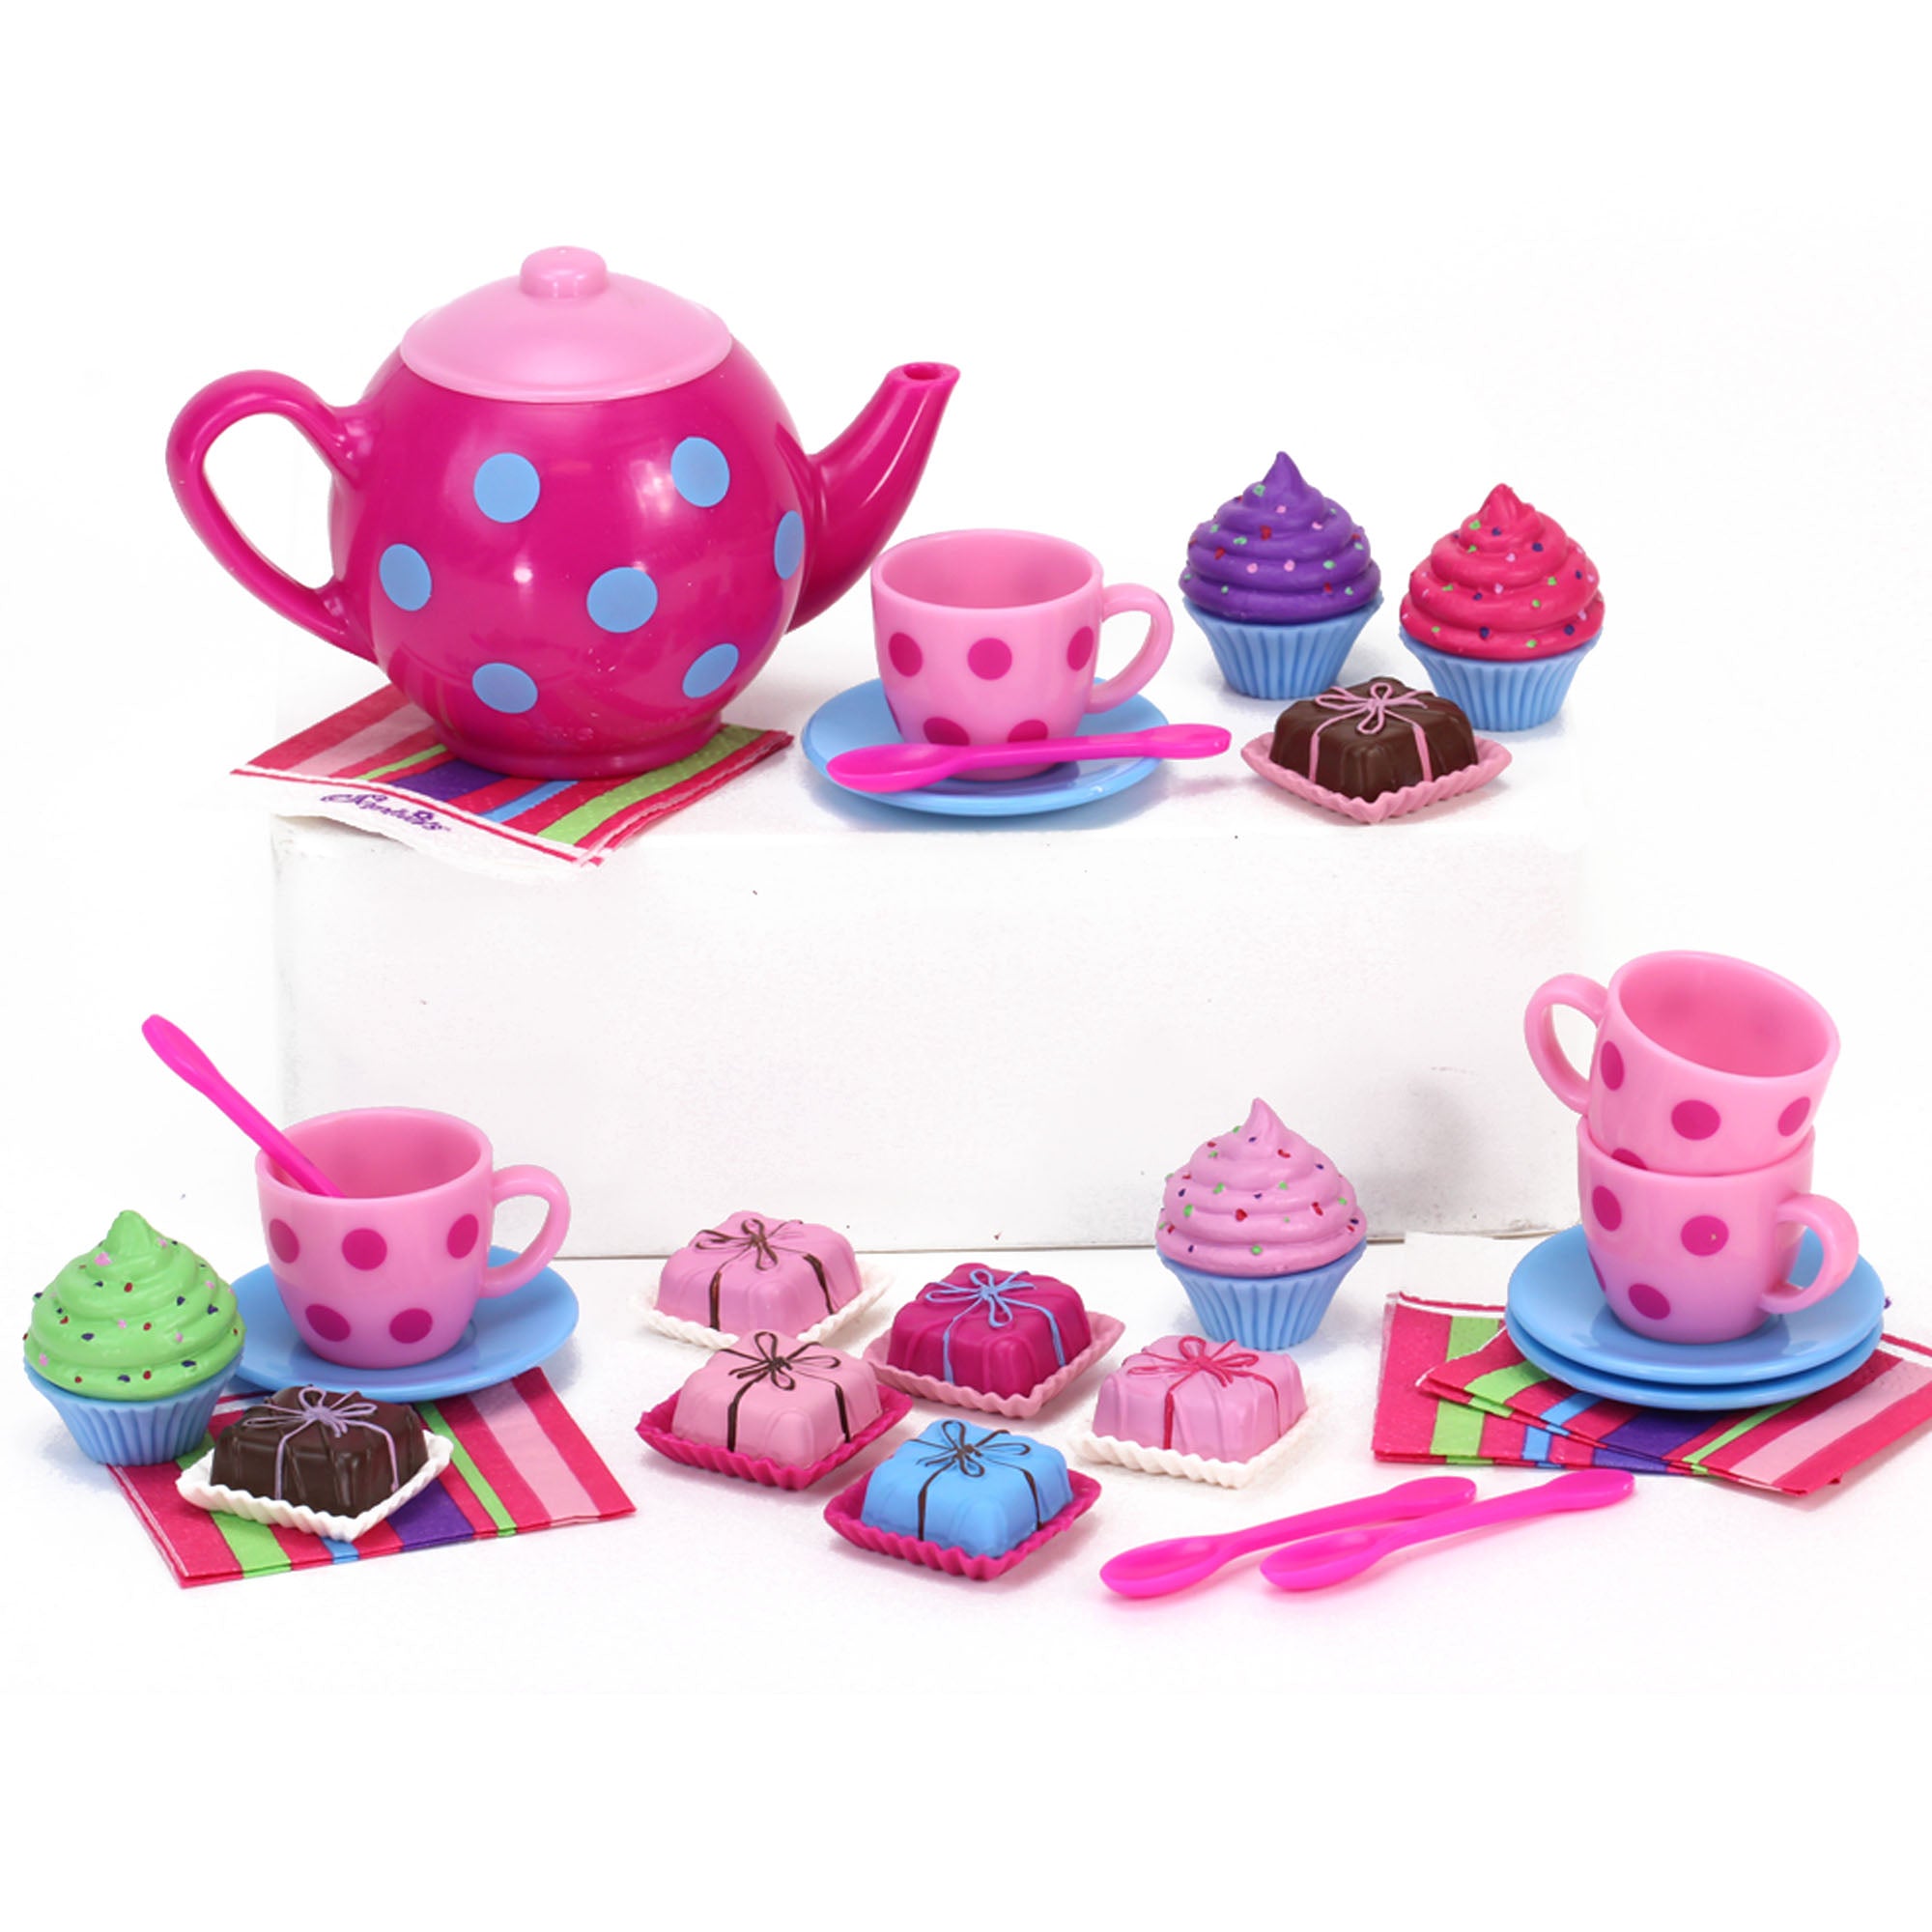 Sophia's Cupcakes, Petit Four Cakes and Tea Set for Four 18" Dolls, Pink